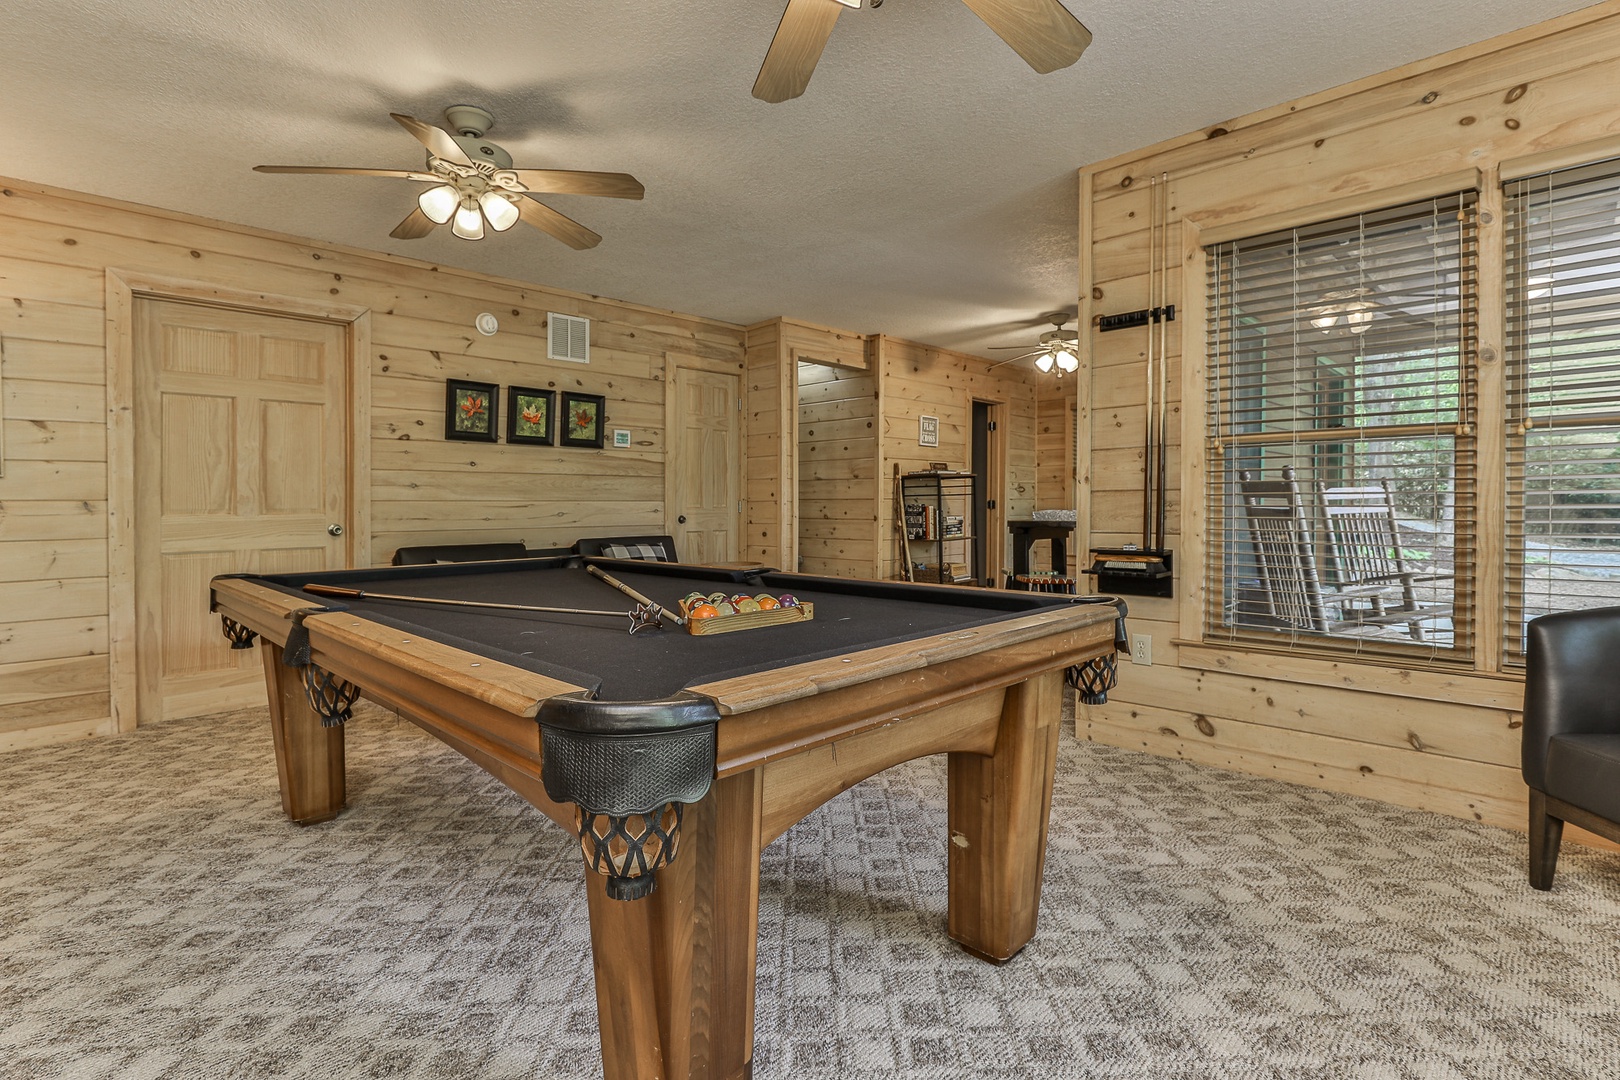 Pool Table in Game Room